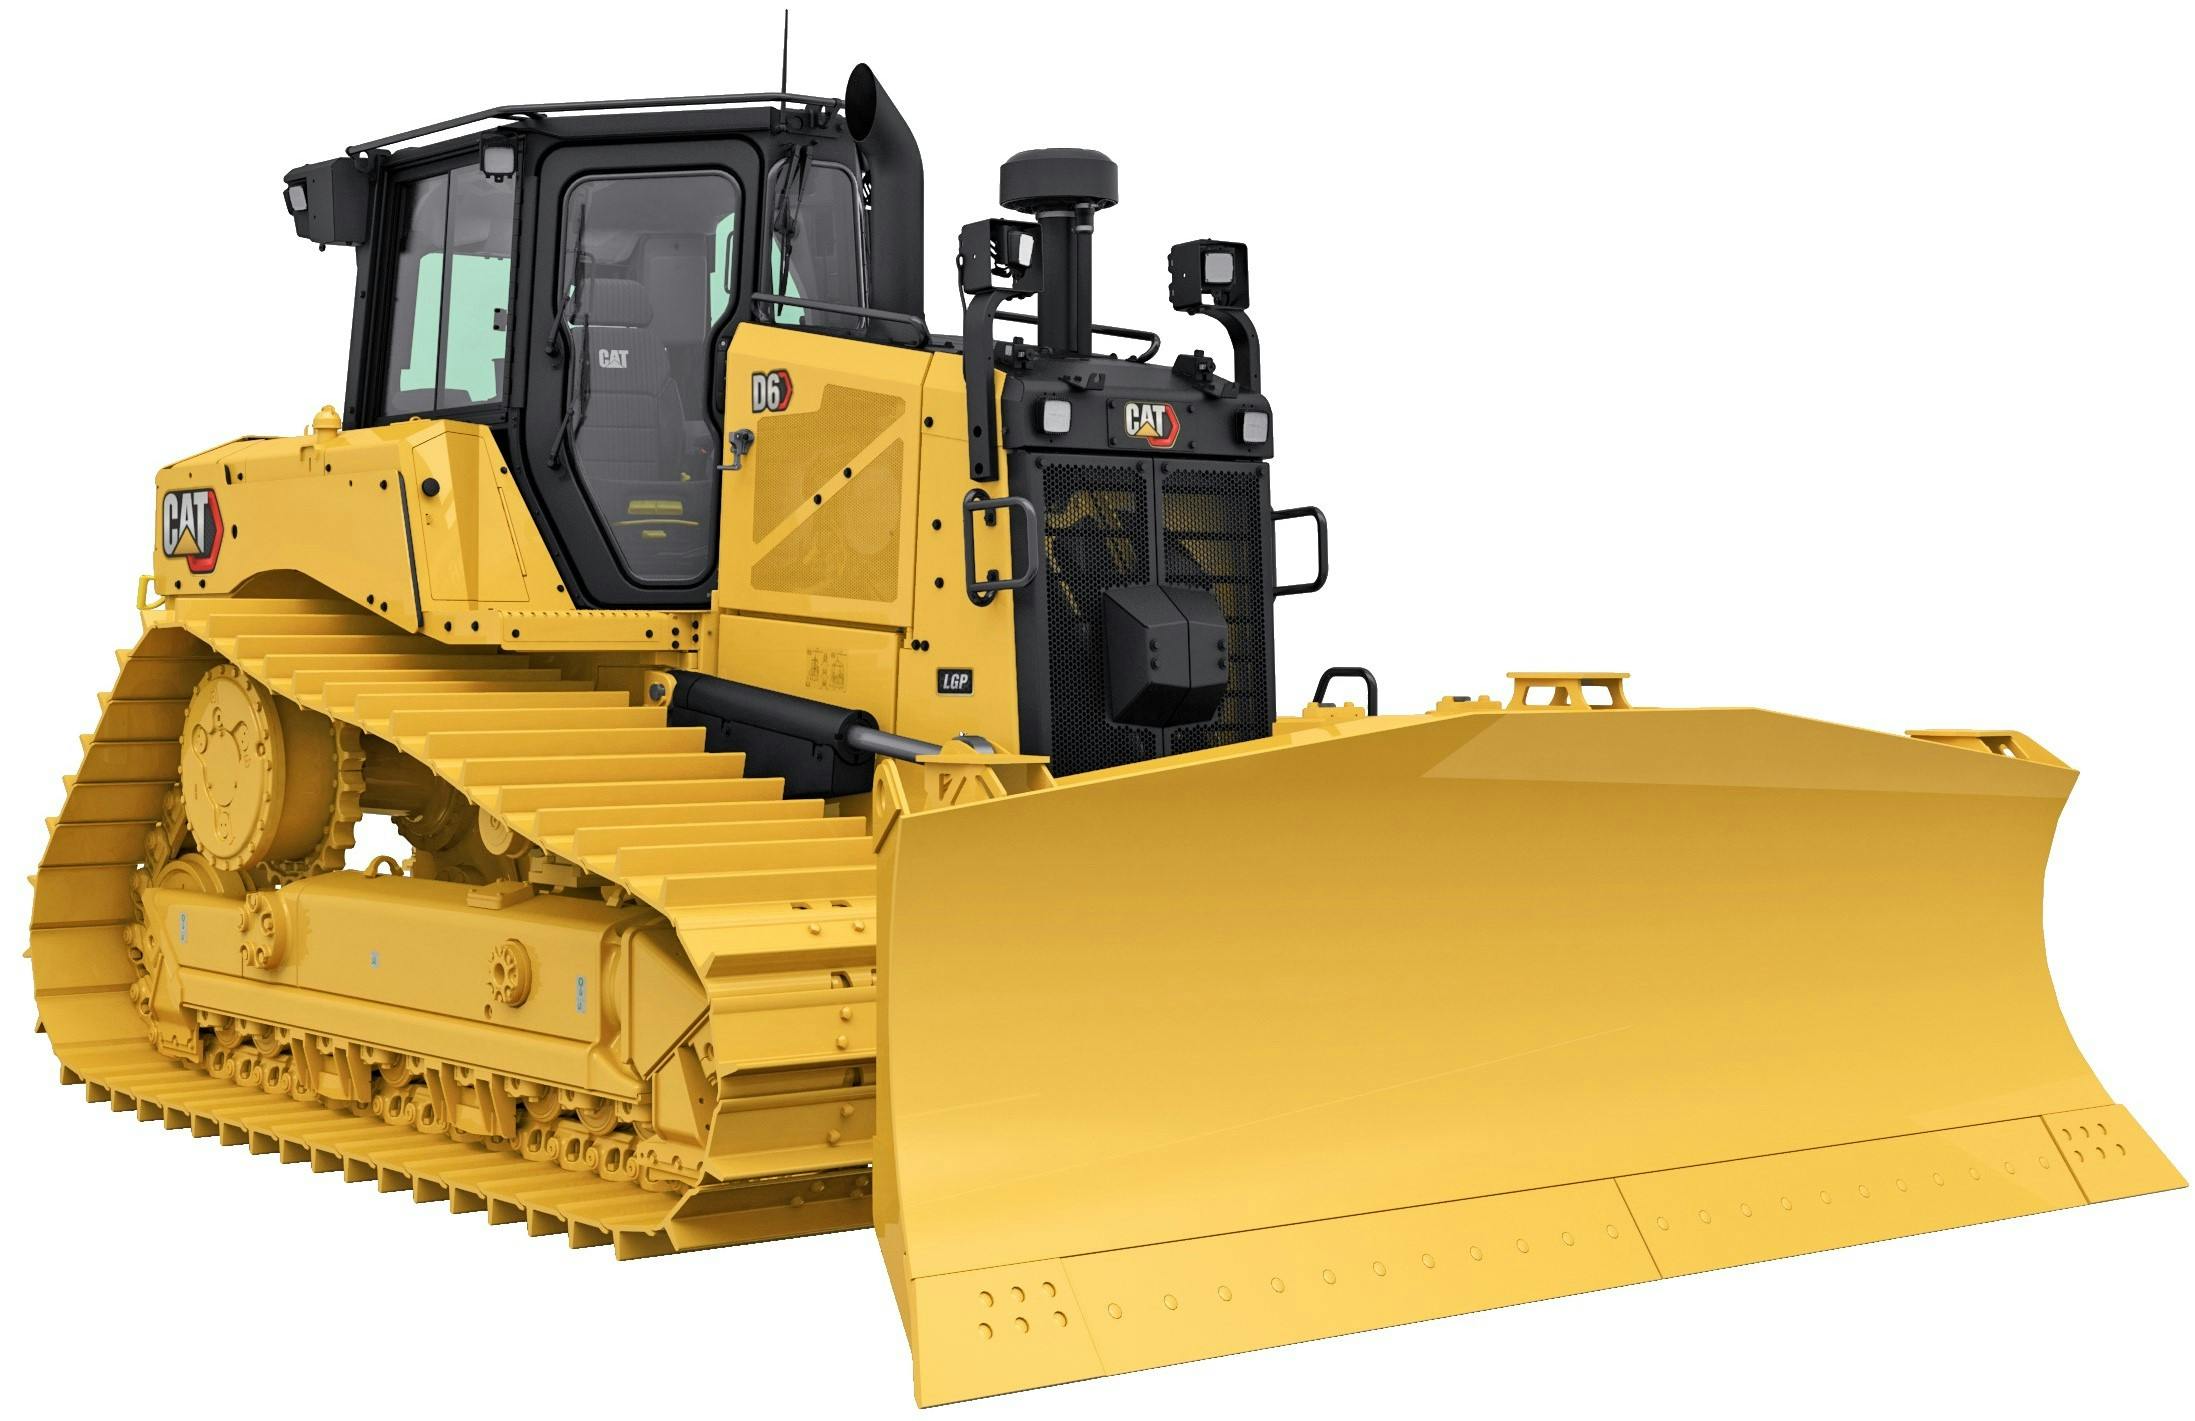 The next generation Cat D6 Dozer is now available at Carolina Cat!